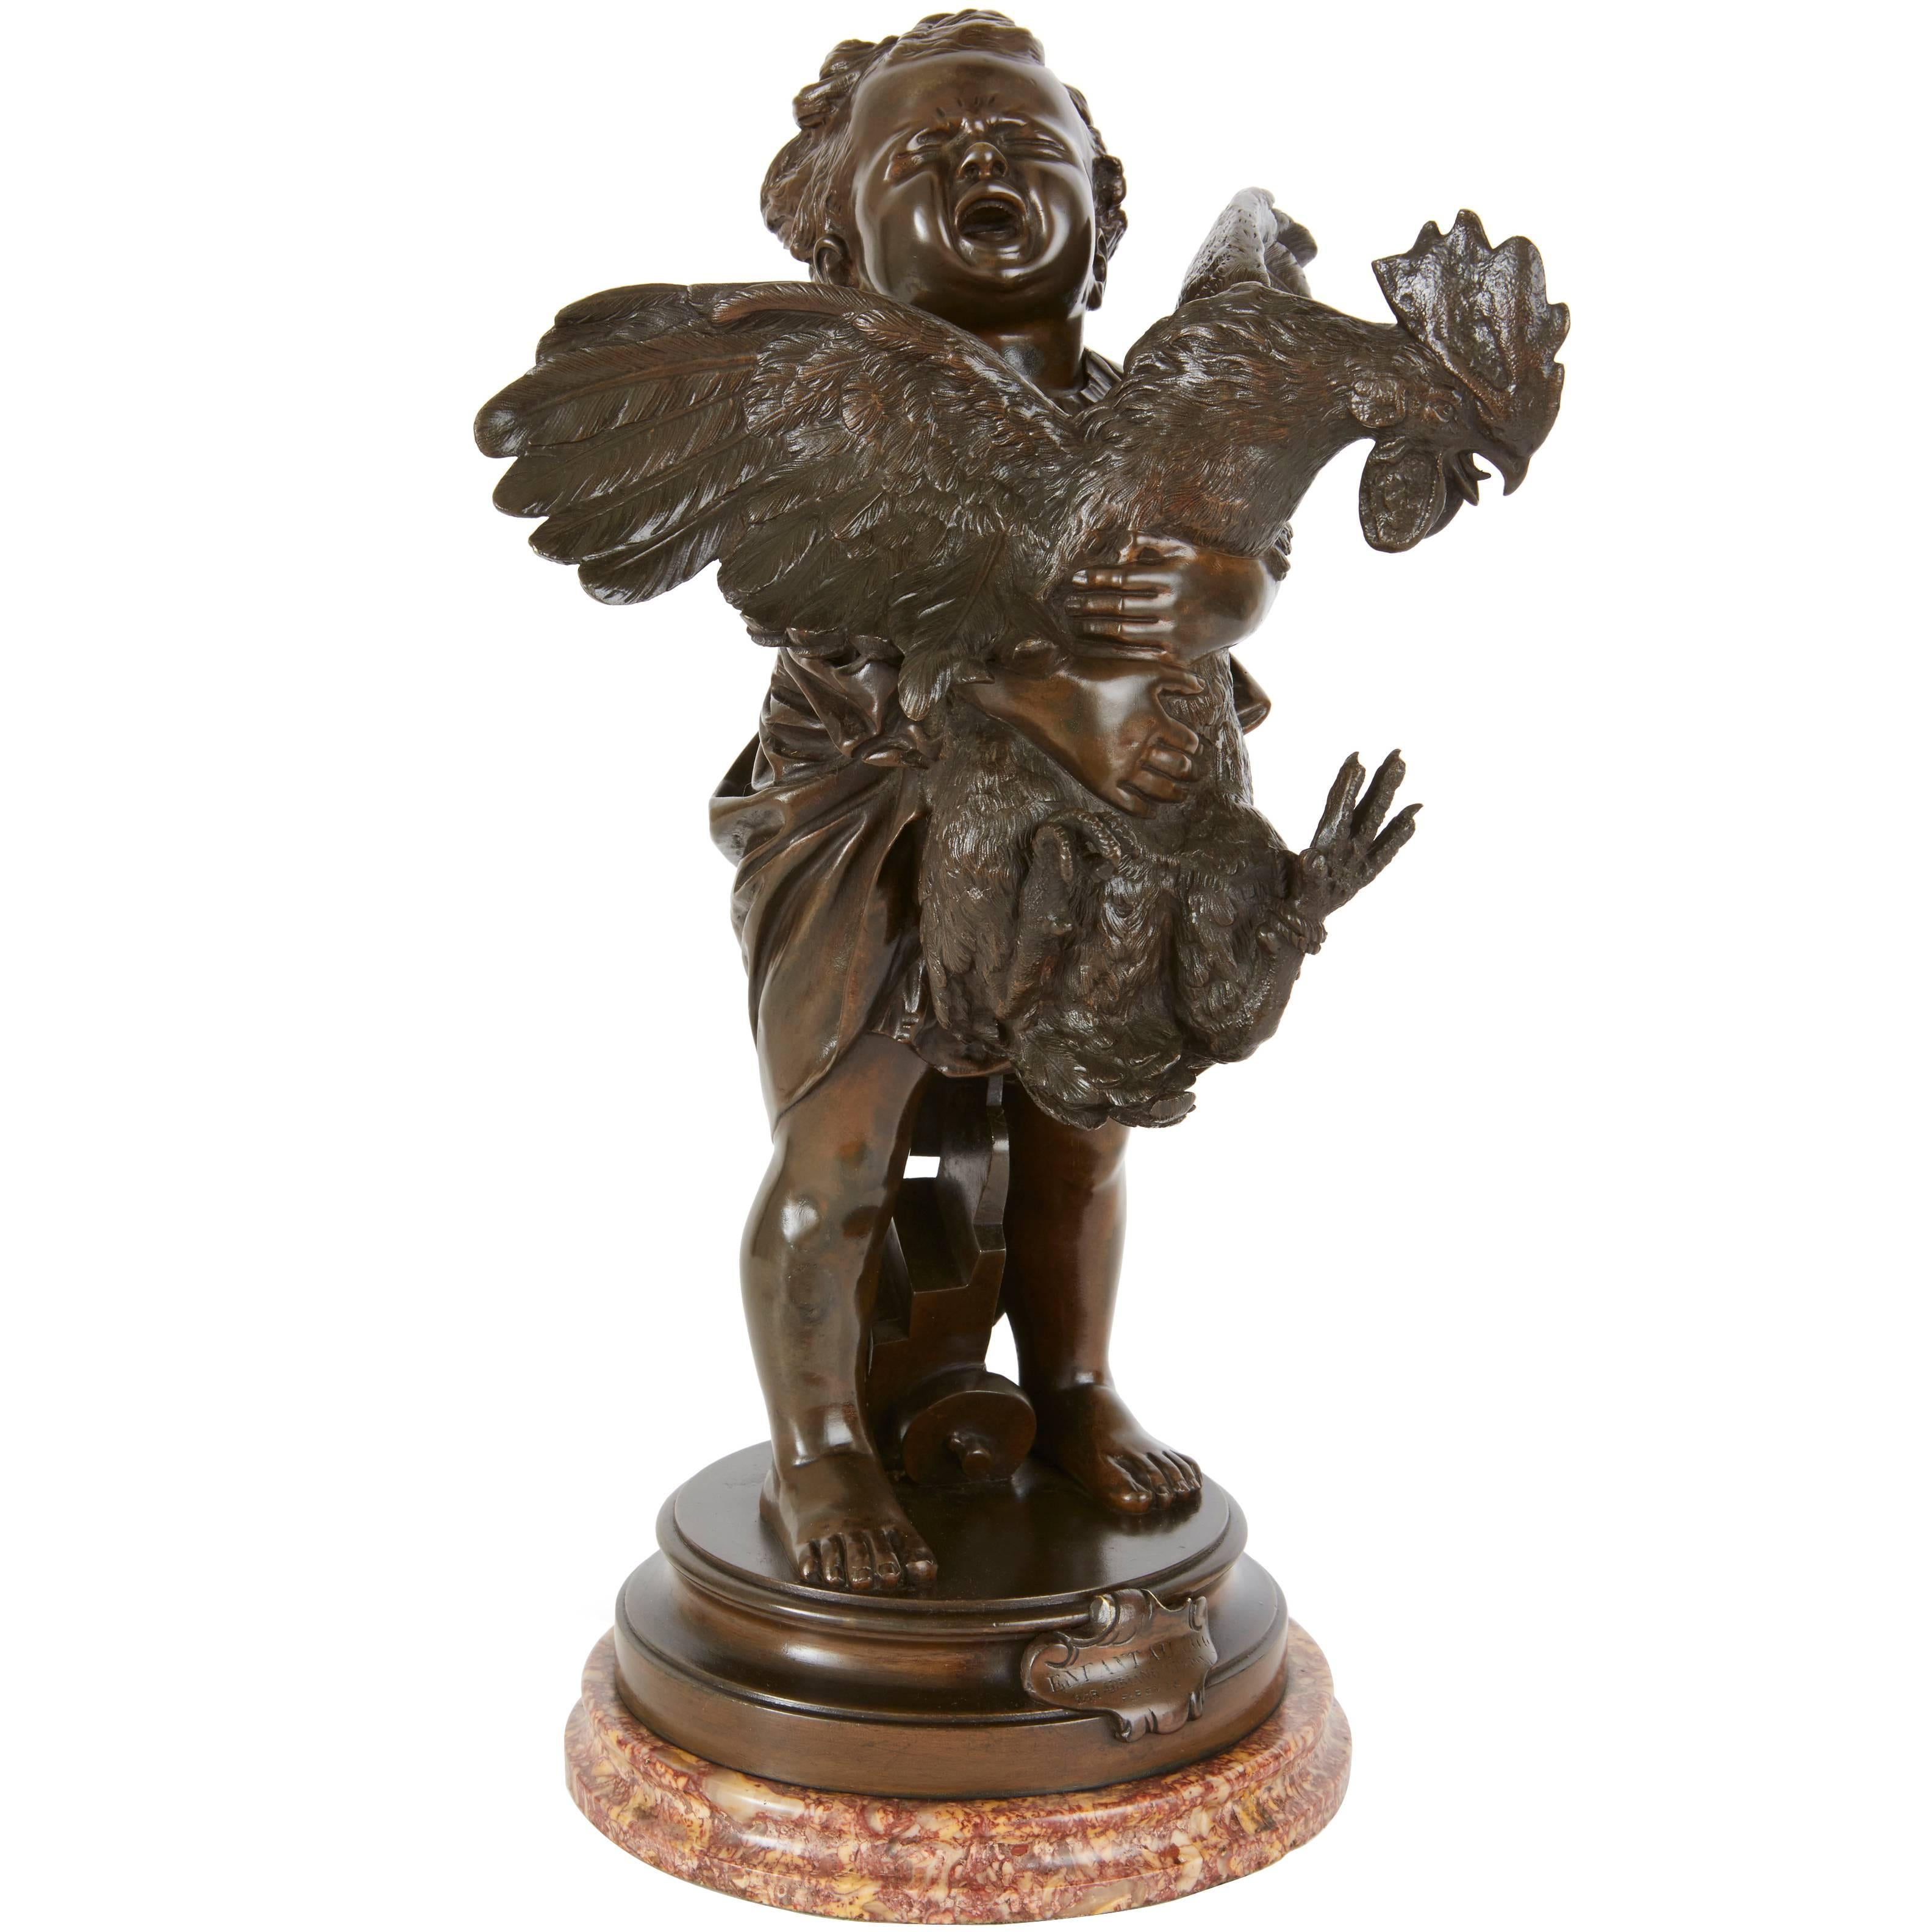 Patinated Bronze Group of a Child Holding a Rooster "L'enfant au Coq"